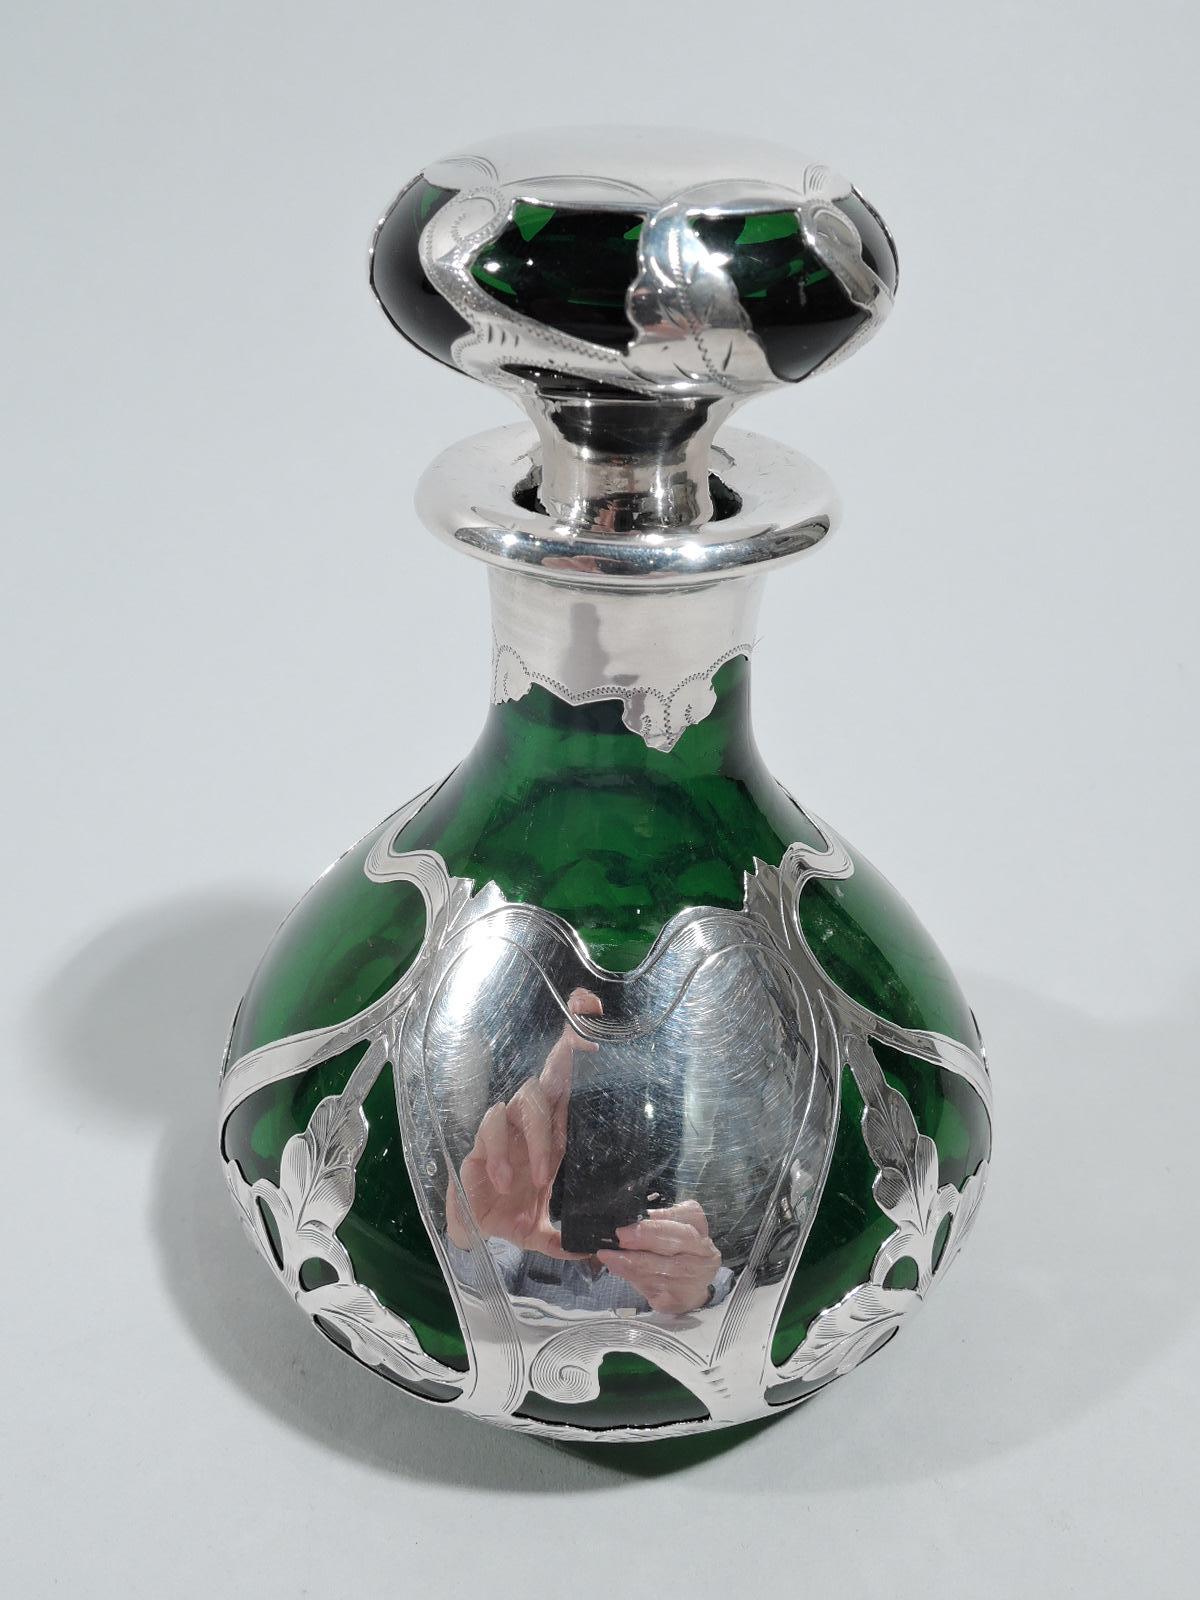 Turn-of-the-century Art Nouveau glass perfume with engraved silver overlay. Made by Gorham in Providence. Ovoid with short neck and flat rim in silver collar. Flattened ball stopper. Overlay in form of open whiplash tendril frames of which some